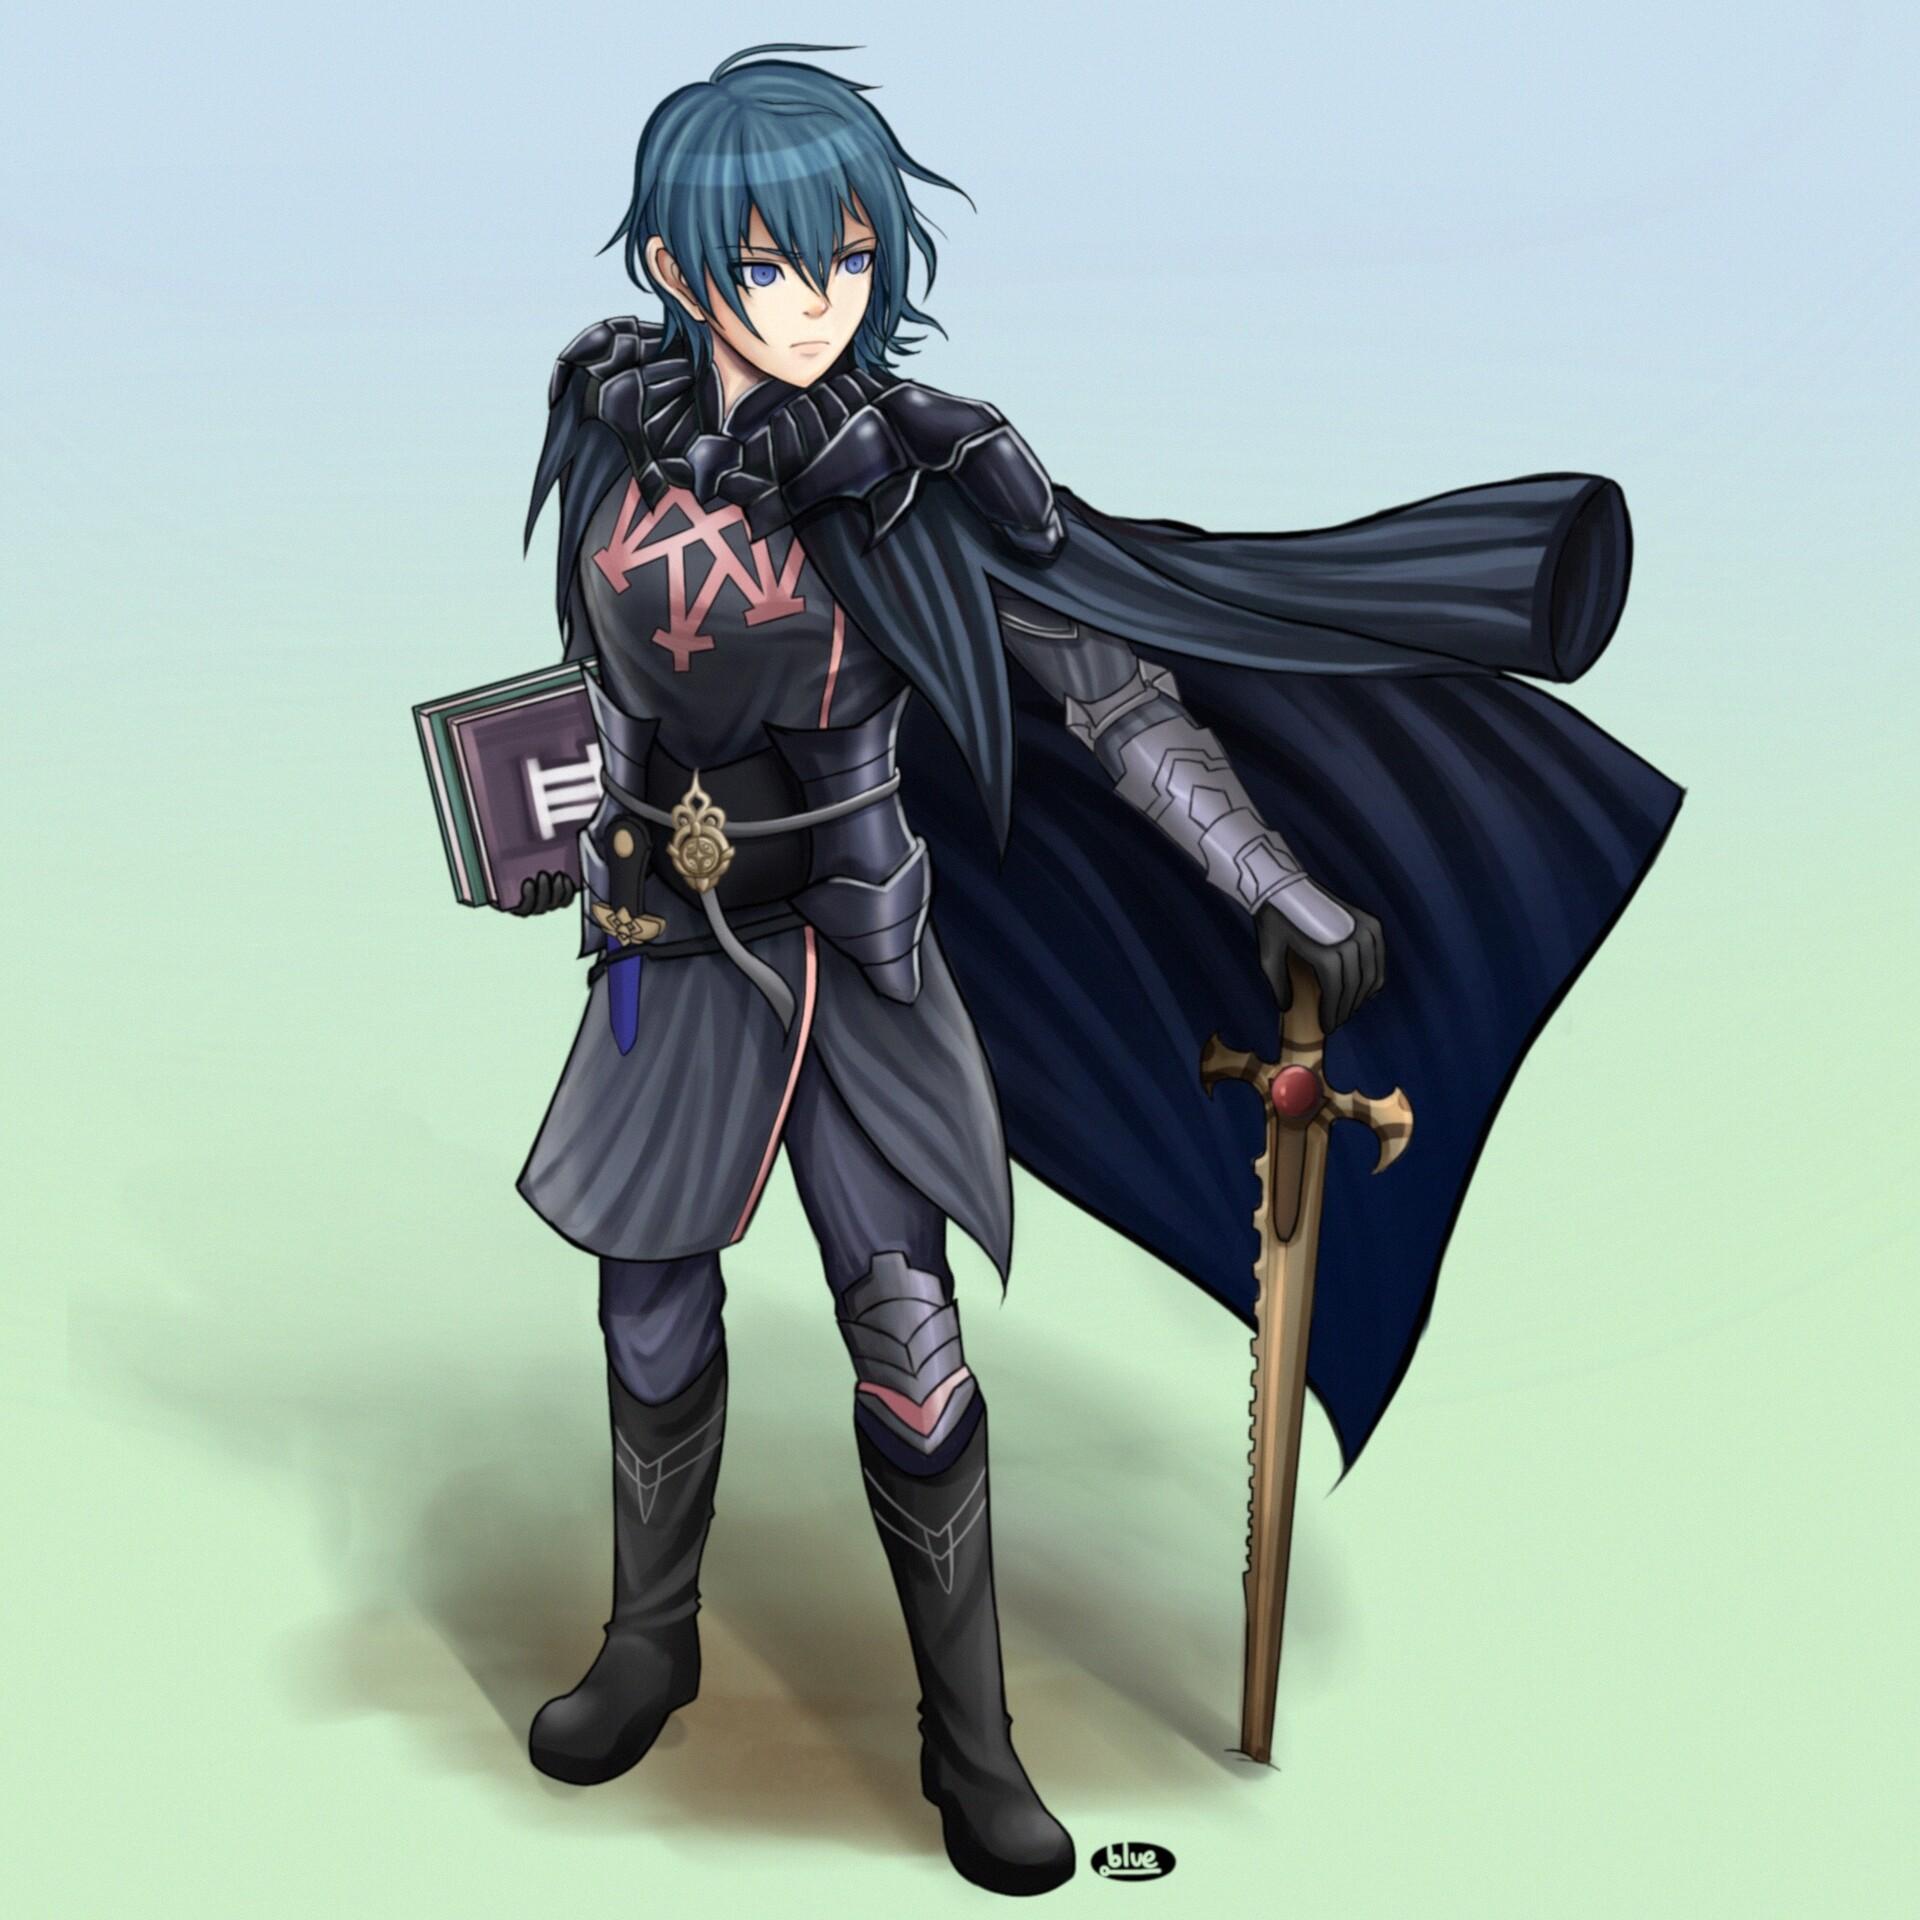 (Commission) Byleth from Fire Emblem: Three